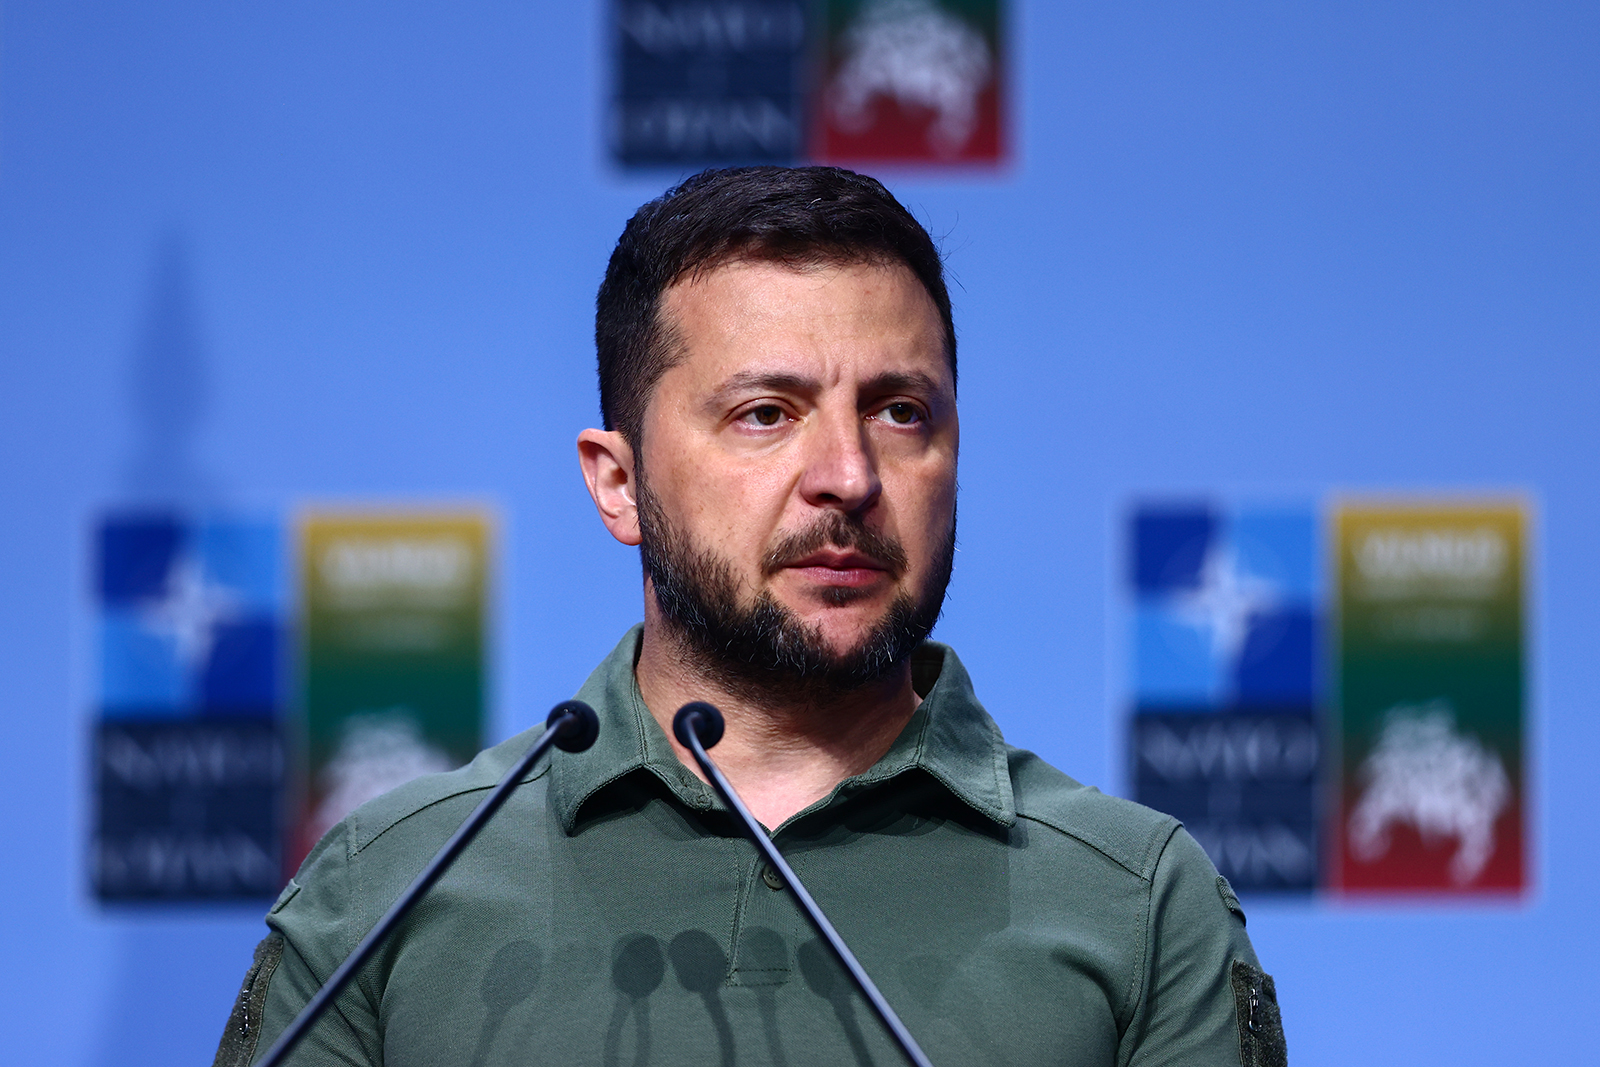 Volodymyr Zelenskyy speaks during a press conference in Vilnius, Lithuania on July 12.